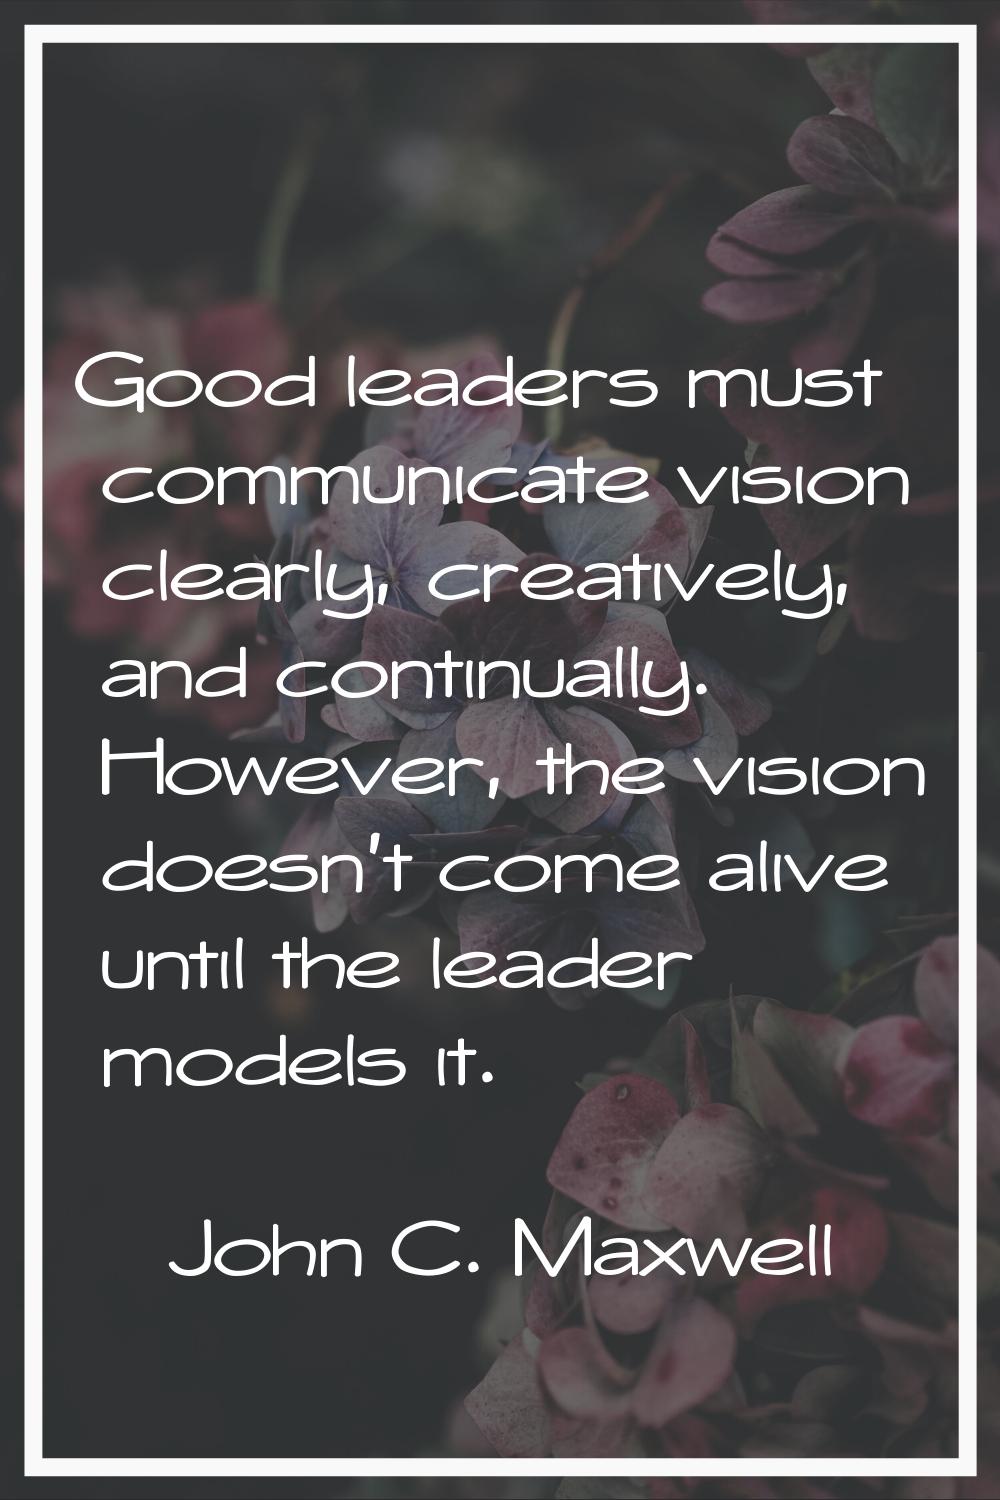 Good leaders must communicate vision clearly, creatively, and continually. However, the vision does